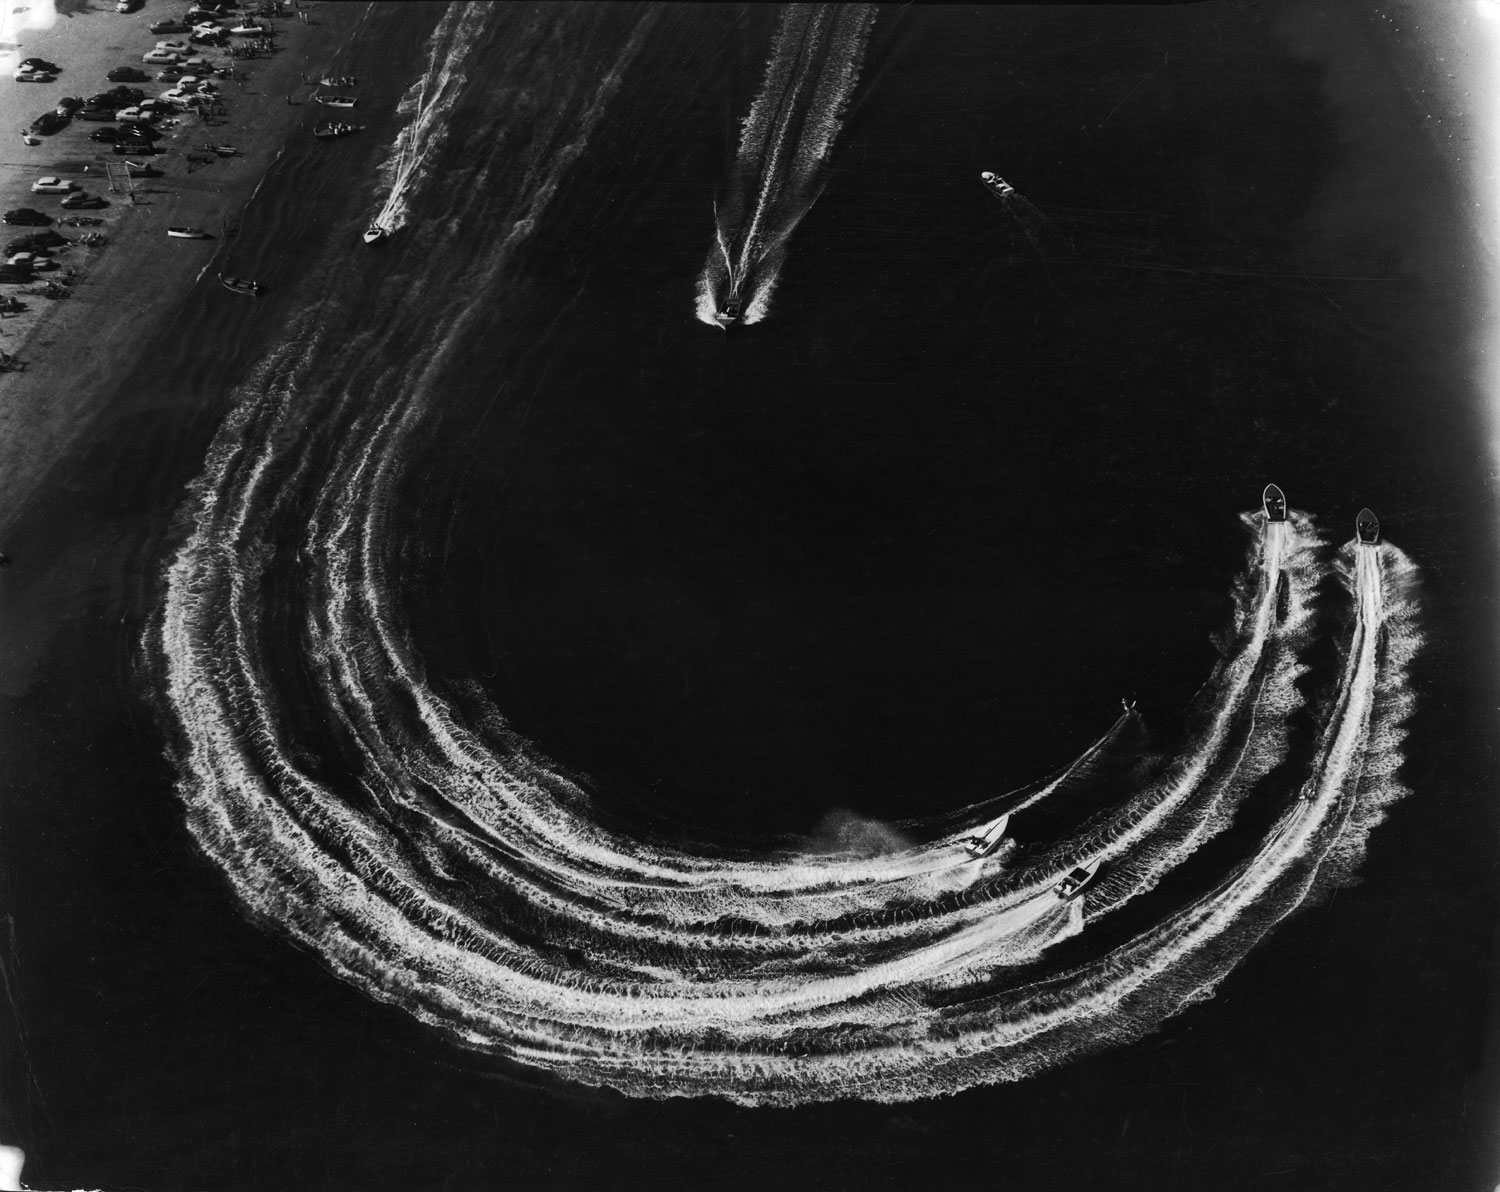 Water skiers and motorboats speed across the water, Long Beach, Calif., photographed from a helicopter, 1952.